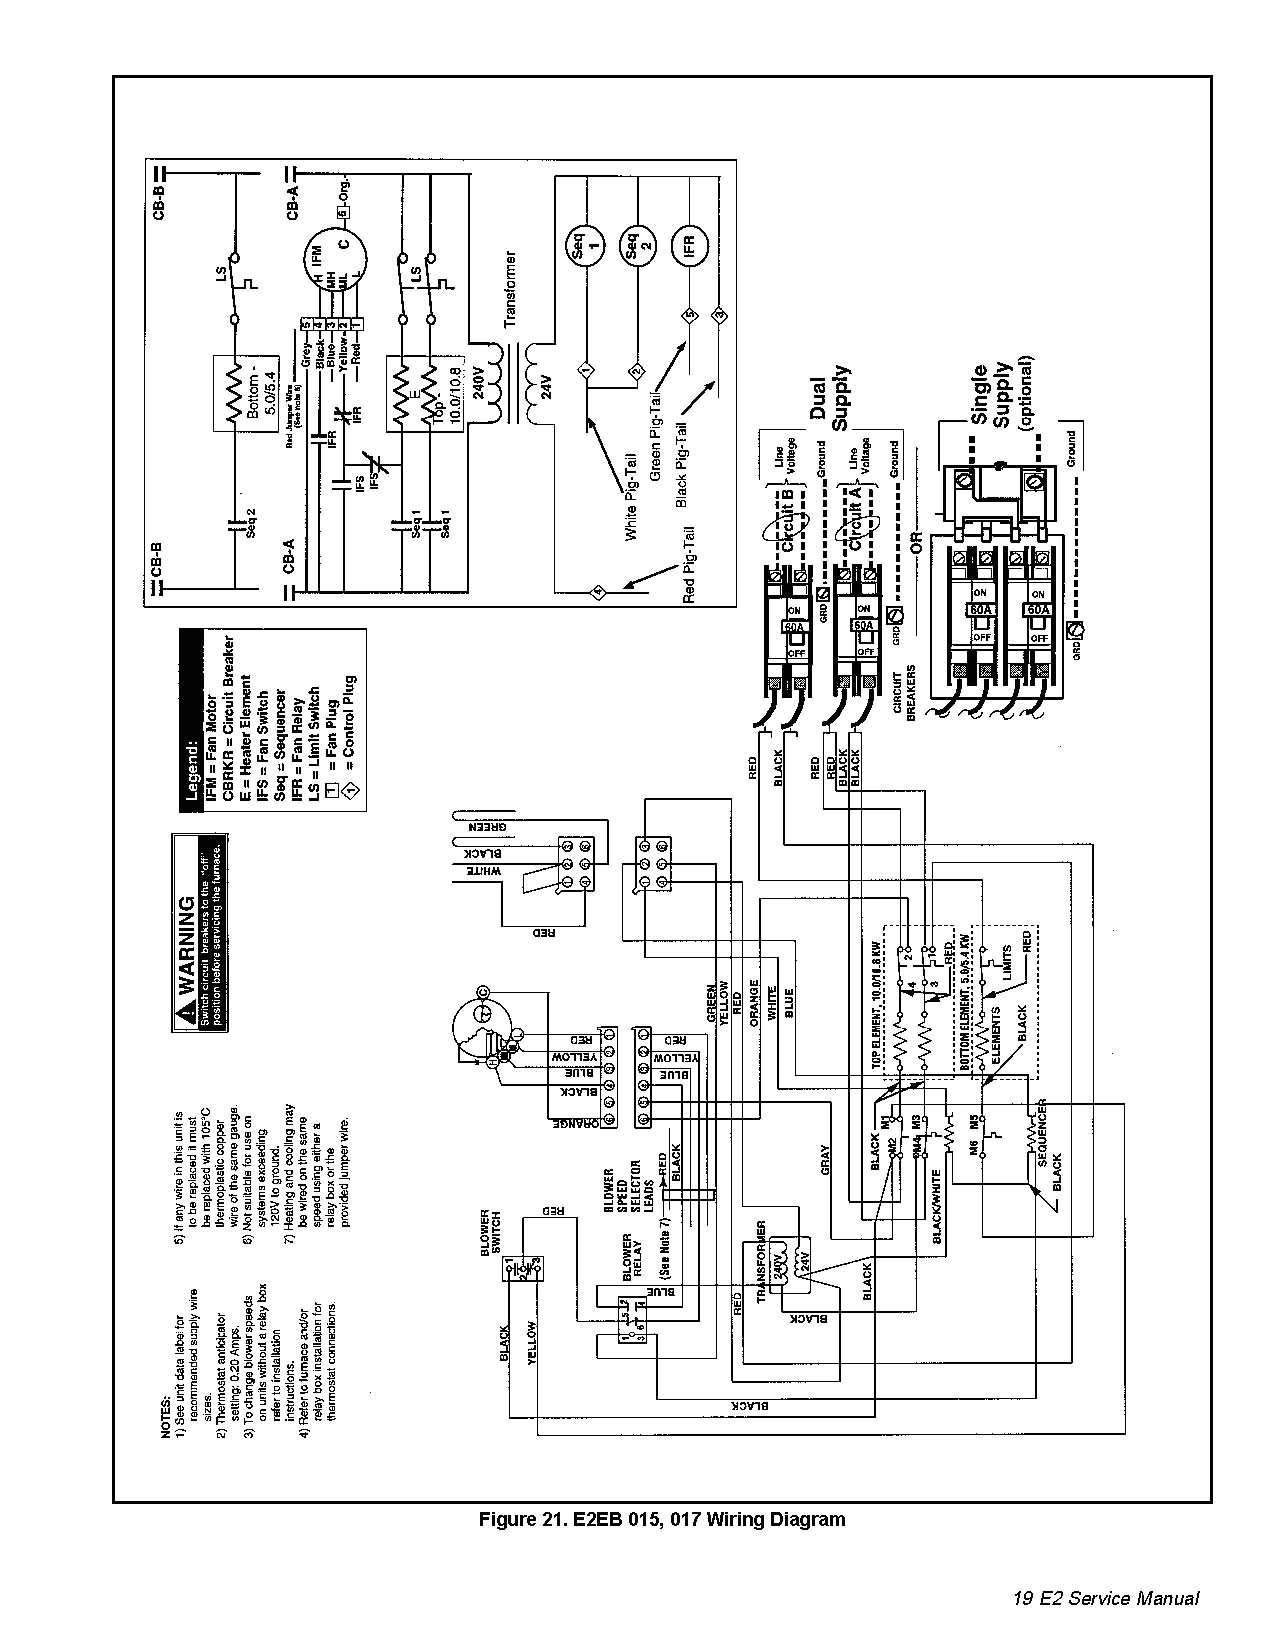 need wiring diagram for furnace blower model e2eh 015hafull size image